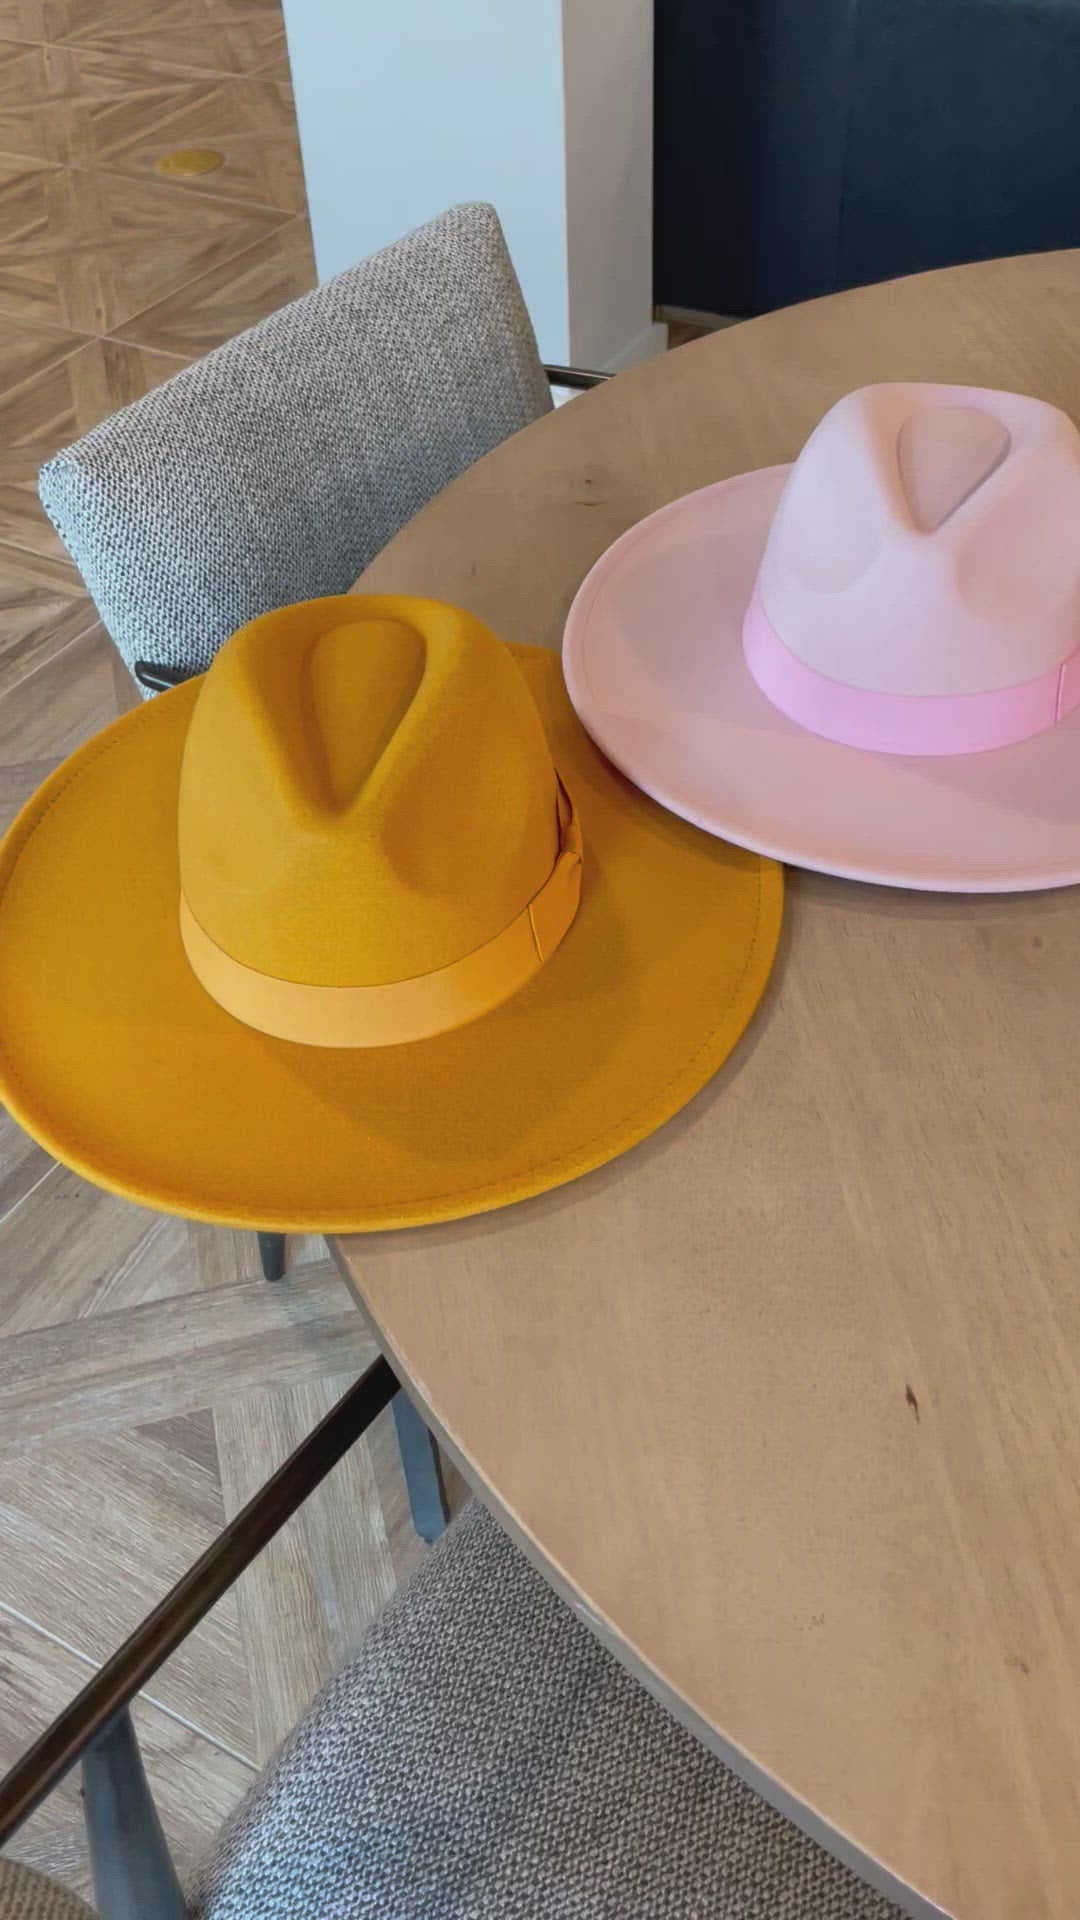 Video showing an assortment of dope hat's fedoras in various colors.